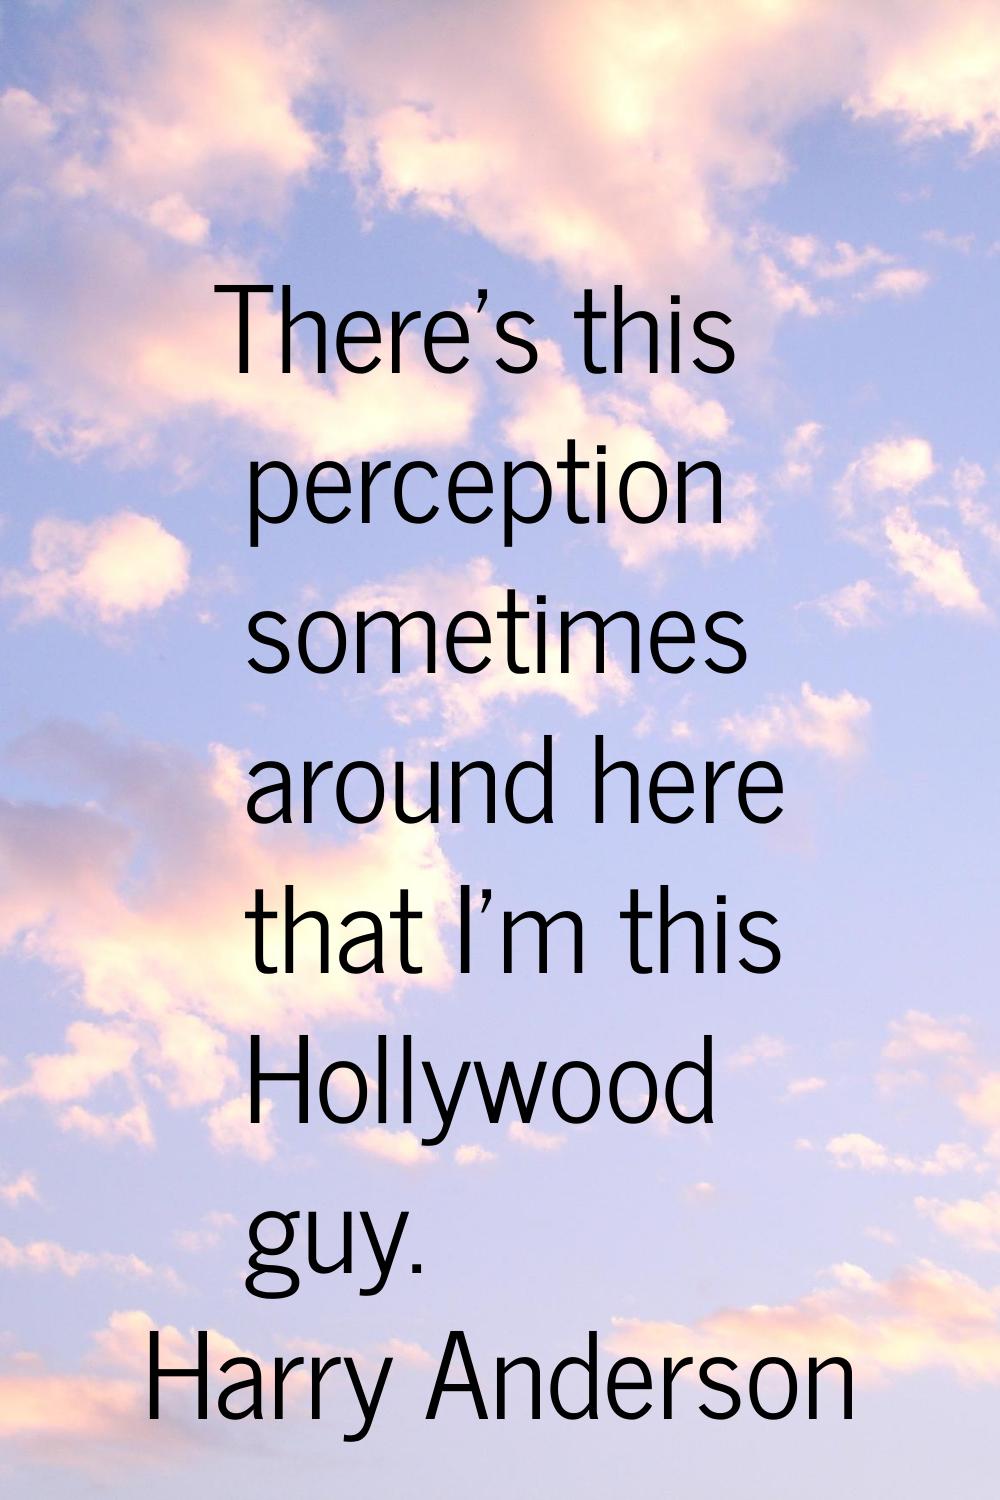 There's this perception sometimes around here that I'm this Hollywood guy.